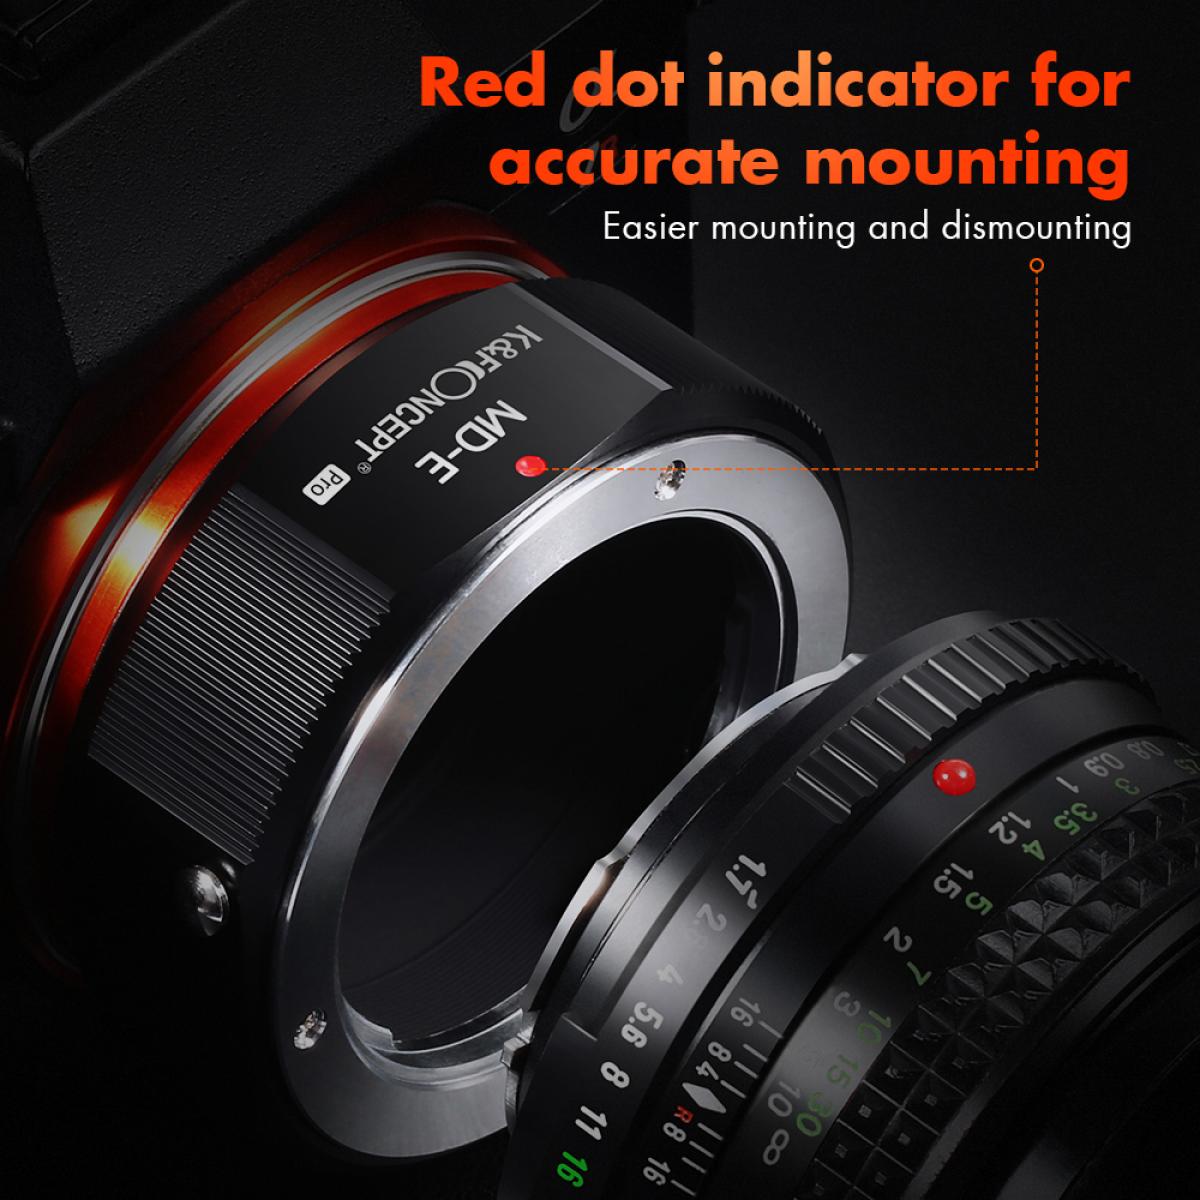 MD to NEX Lens Mount Adapter for Minolta MD MC Mount Lens to NEX E Mount Mirrorless Cameras for Sony A6000 A6400 A7II A5100 A7 A7RIII K&F Concept